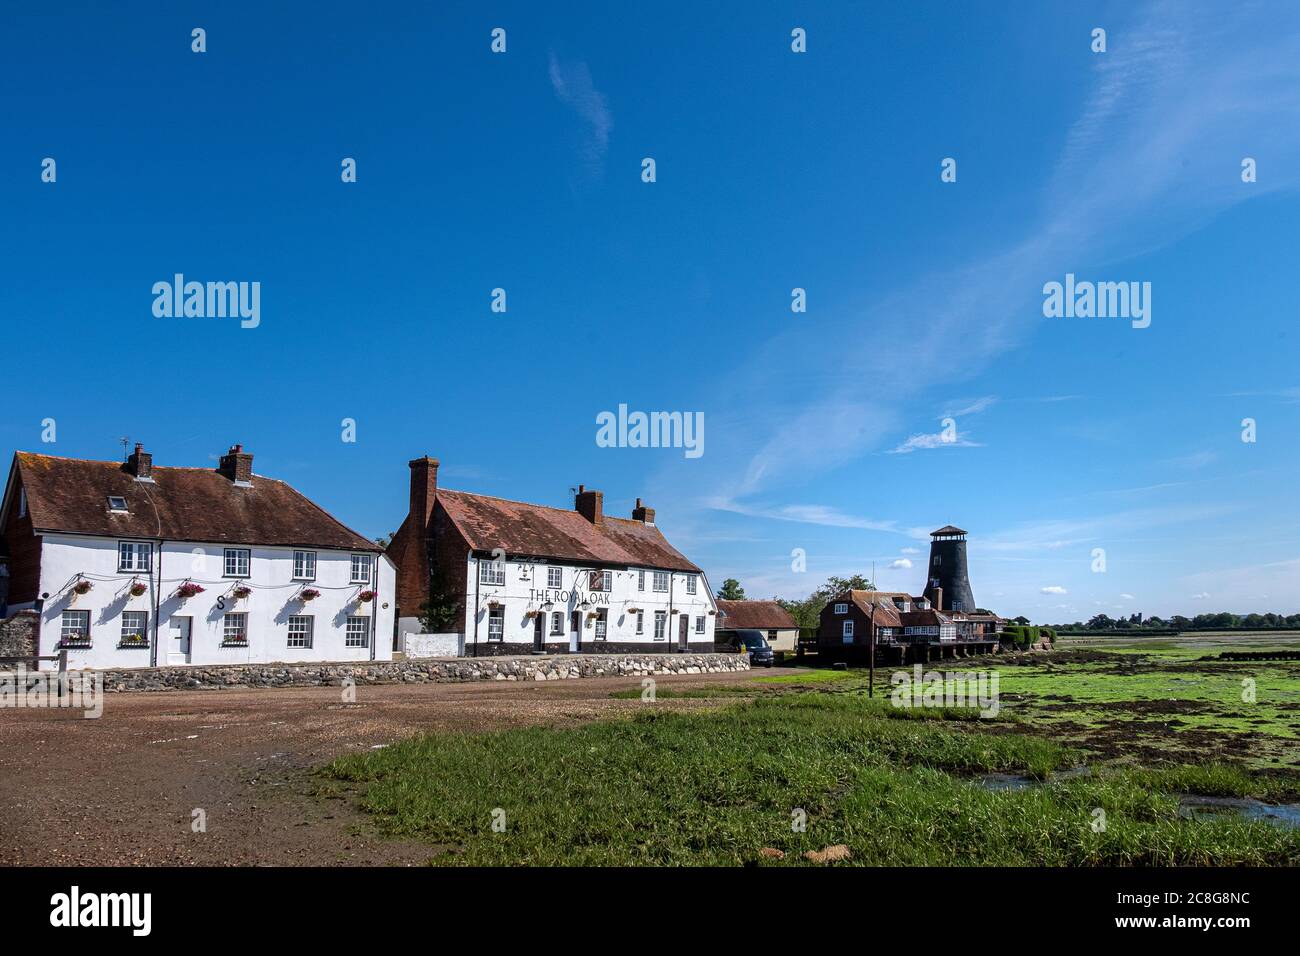 The Royal Oak at Langstone Harbour, Hampshire UK against a blue sky and at low tide with the old mill in the background. Stock Photo